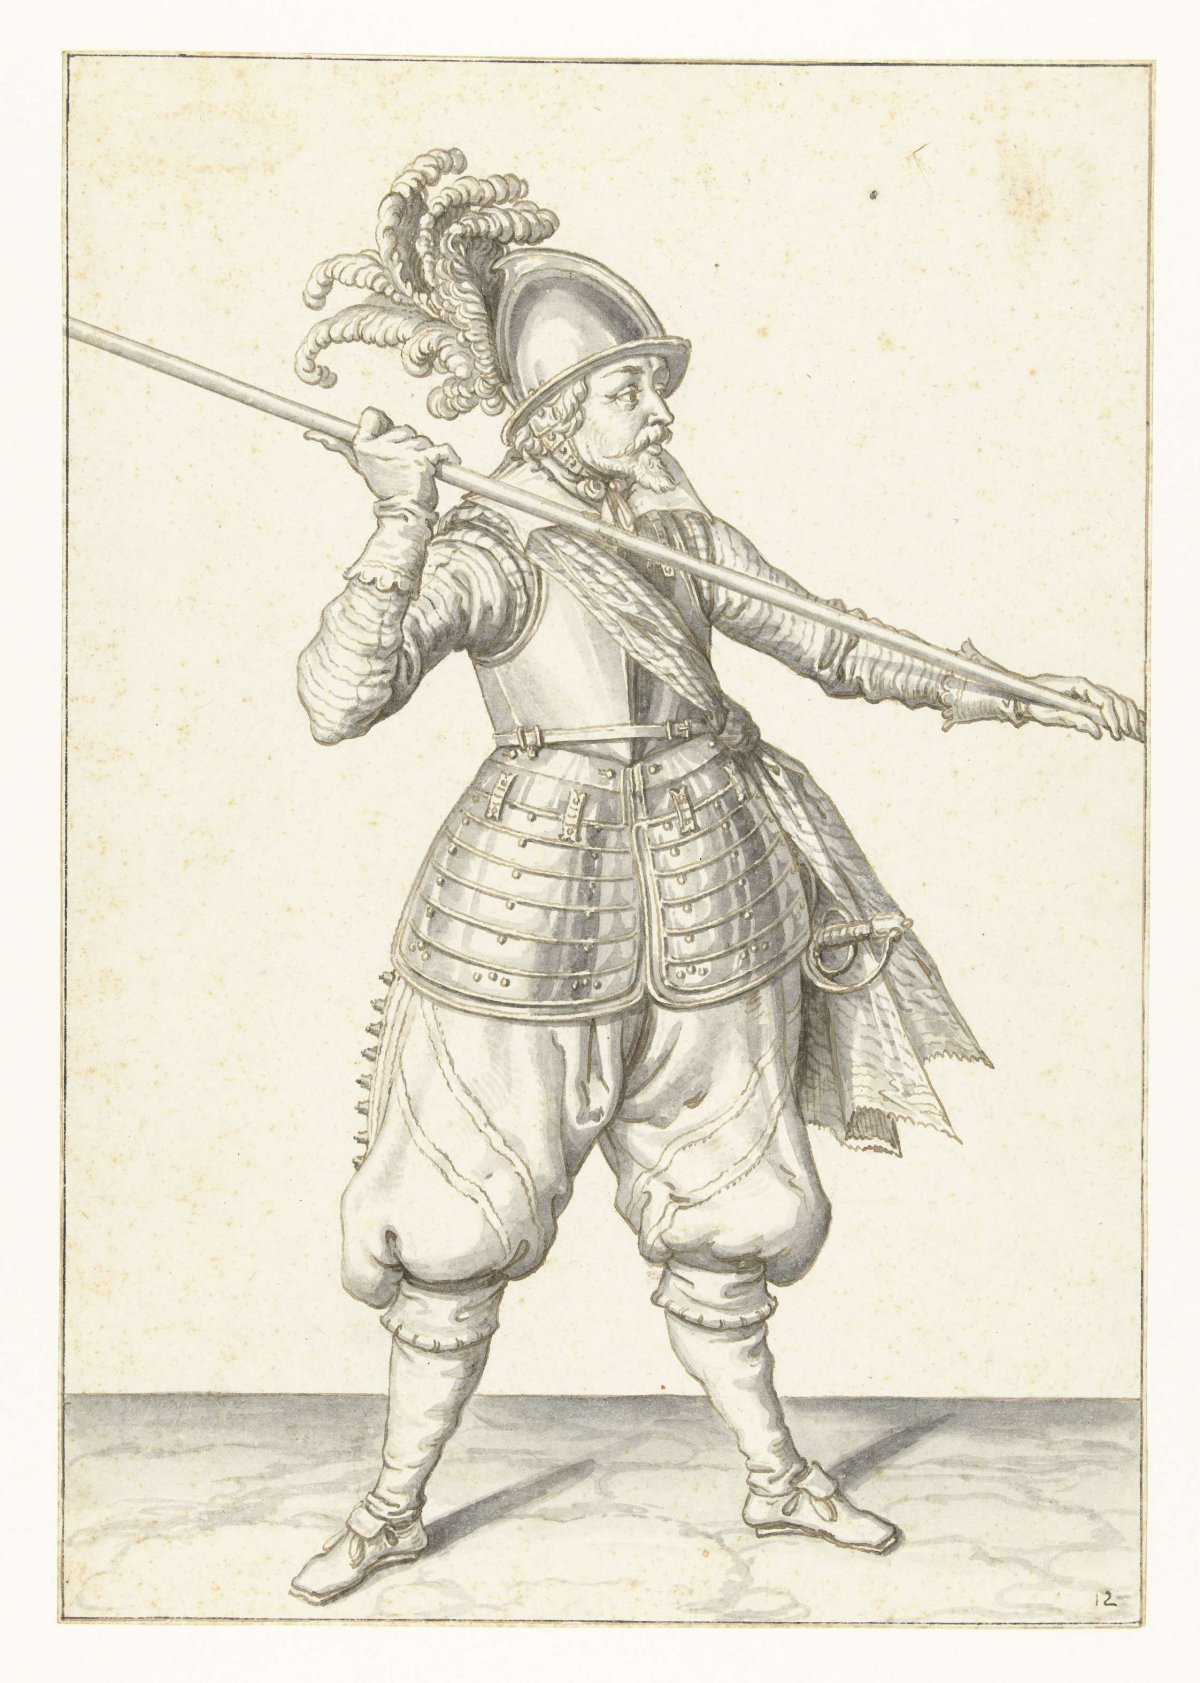 Soldier carrying his spear with both hands far apart above his right shoulder, the point pointed diagonally toward the ground, Jacques de Gheyn (II), 1596 - 1606